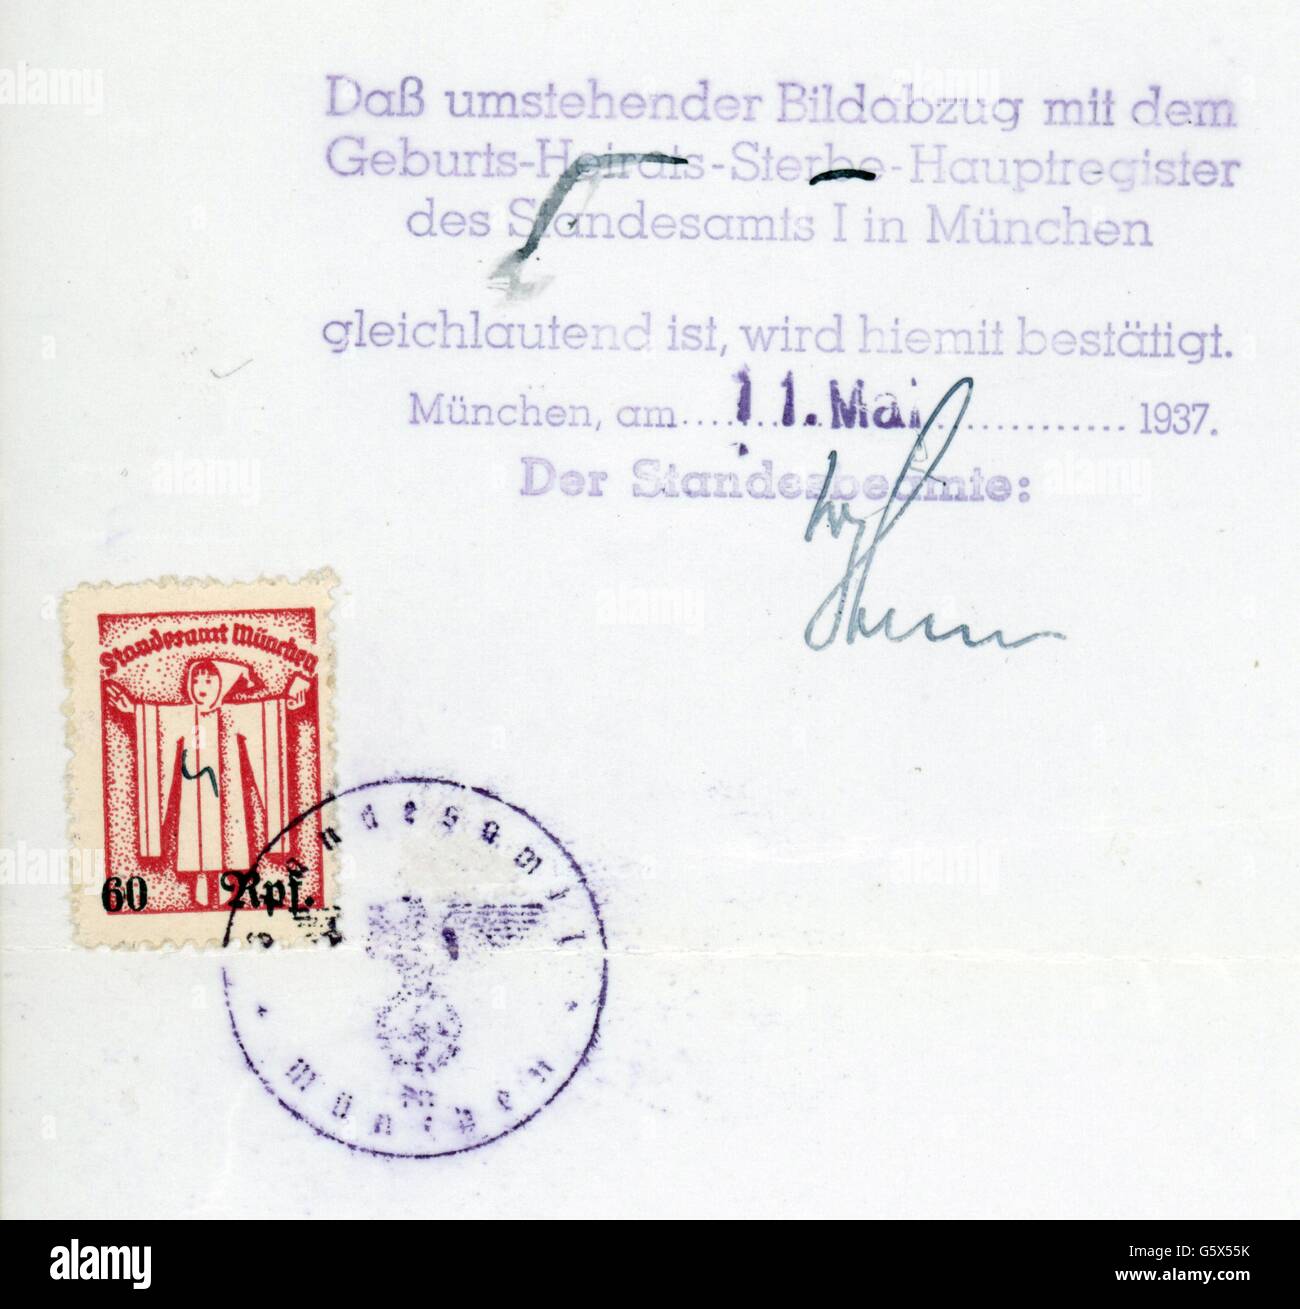 documents,acknowledgement of the photocopy of the birth certificate for Otto Paul Johann Dussler,born on 17.12.1898,issued by Register Office I,Munich,11.5.1937,19th century,Germany,Upper Bavaria,birth,births,birth certificate,birth certificates,natal register,register,registers,revenue stamp,stamp,stamps,signature,signatures,copies,attestation,attestations,confirmation,confirmations,acknowledgement,acknowledgements,confirmation of receipt of payment,German Reich,Third Reich,Aryan certificate,documents,document,photocopy,photo,Additional-Rights-Clearences-Not Available Stock Photo